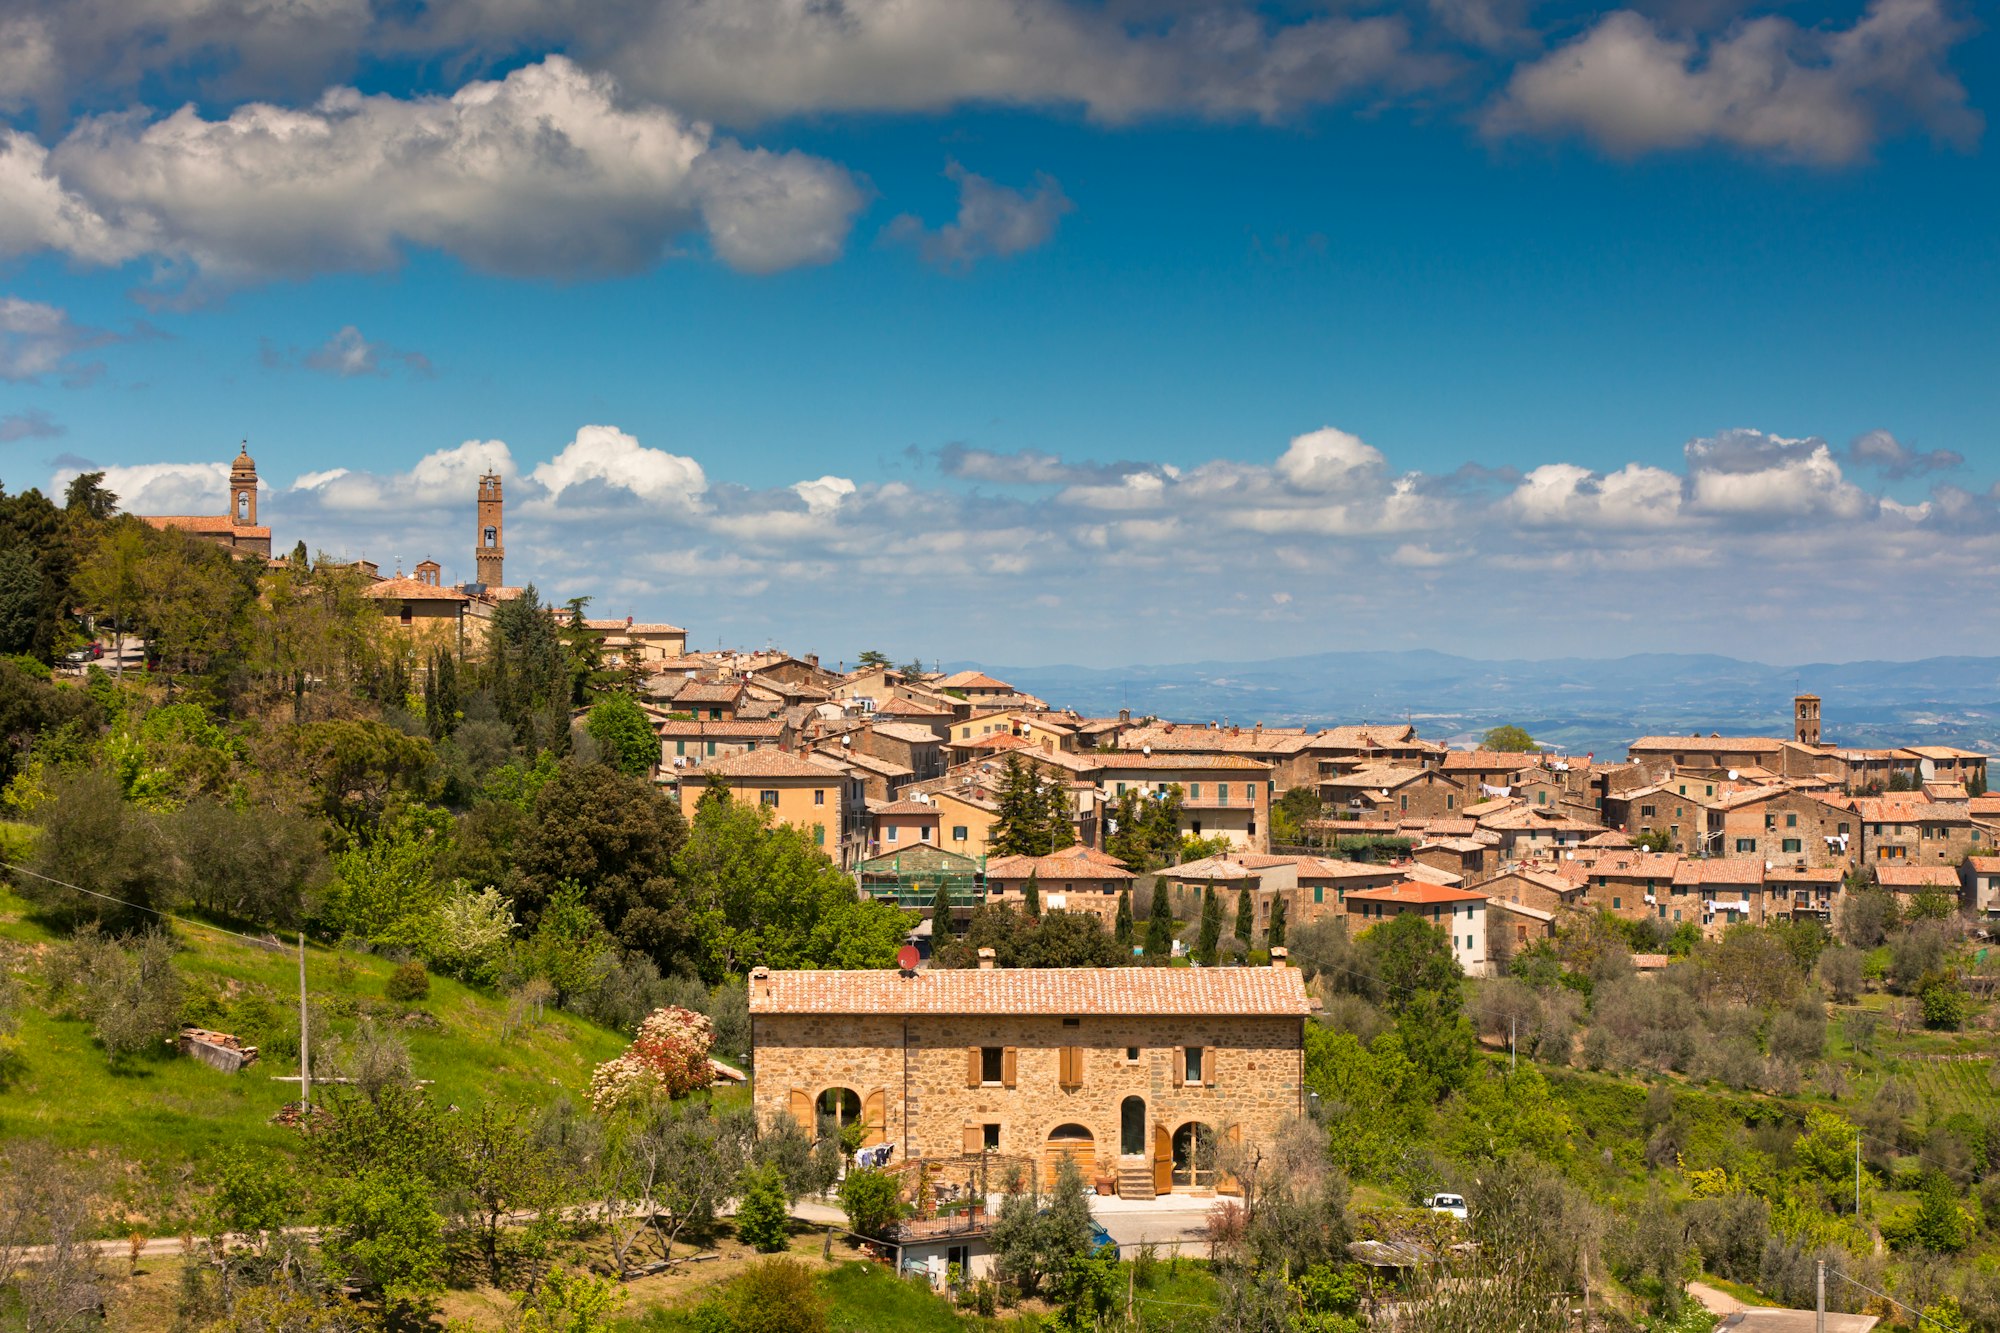 Tuscan wine town of Montalcino view, Italy